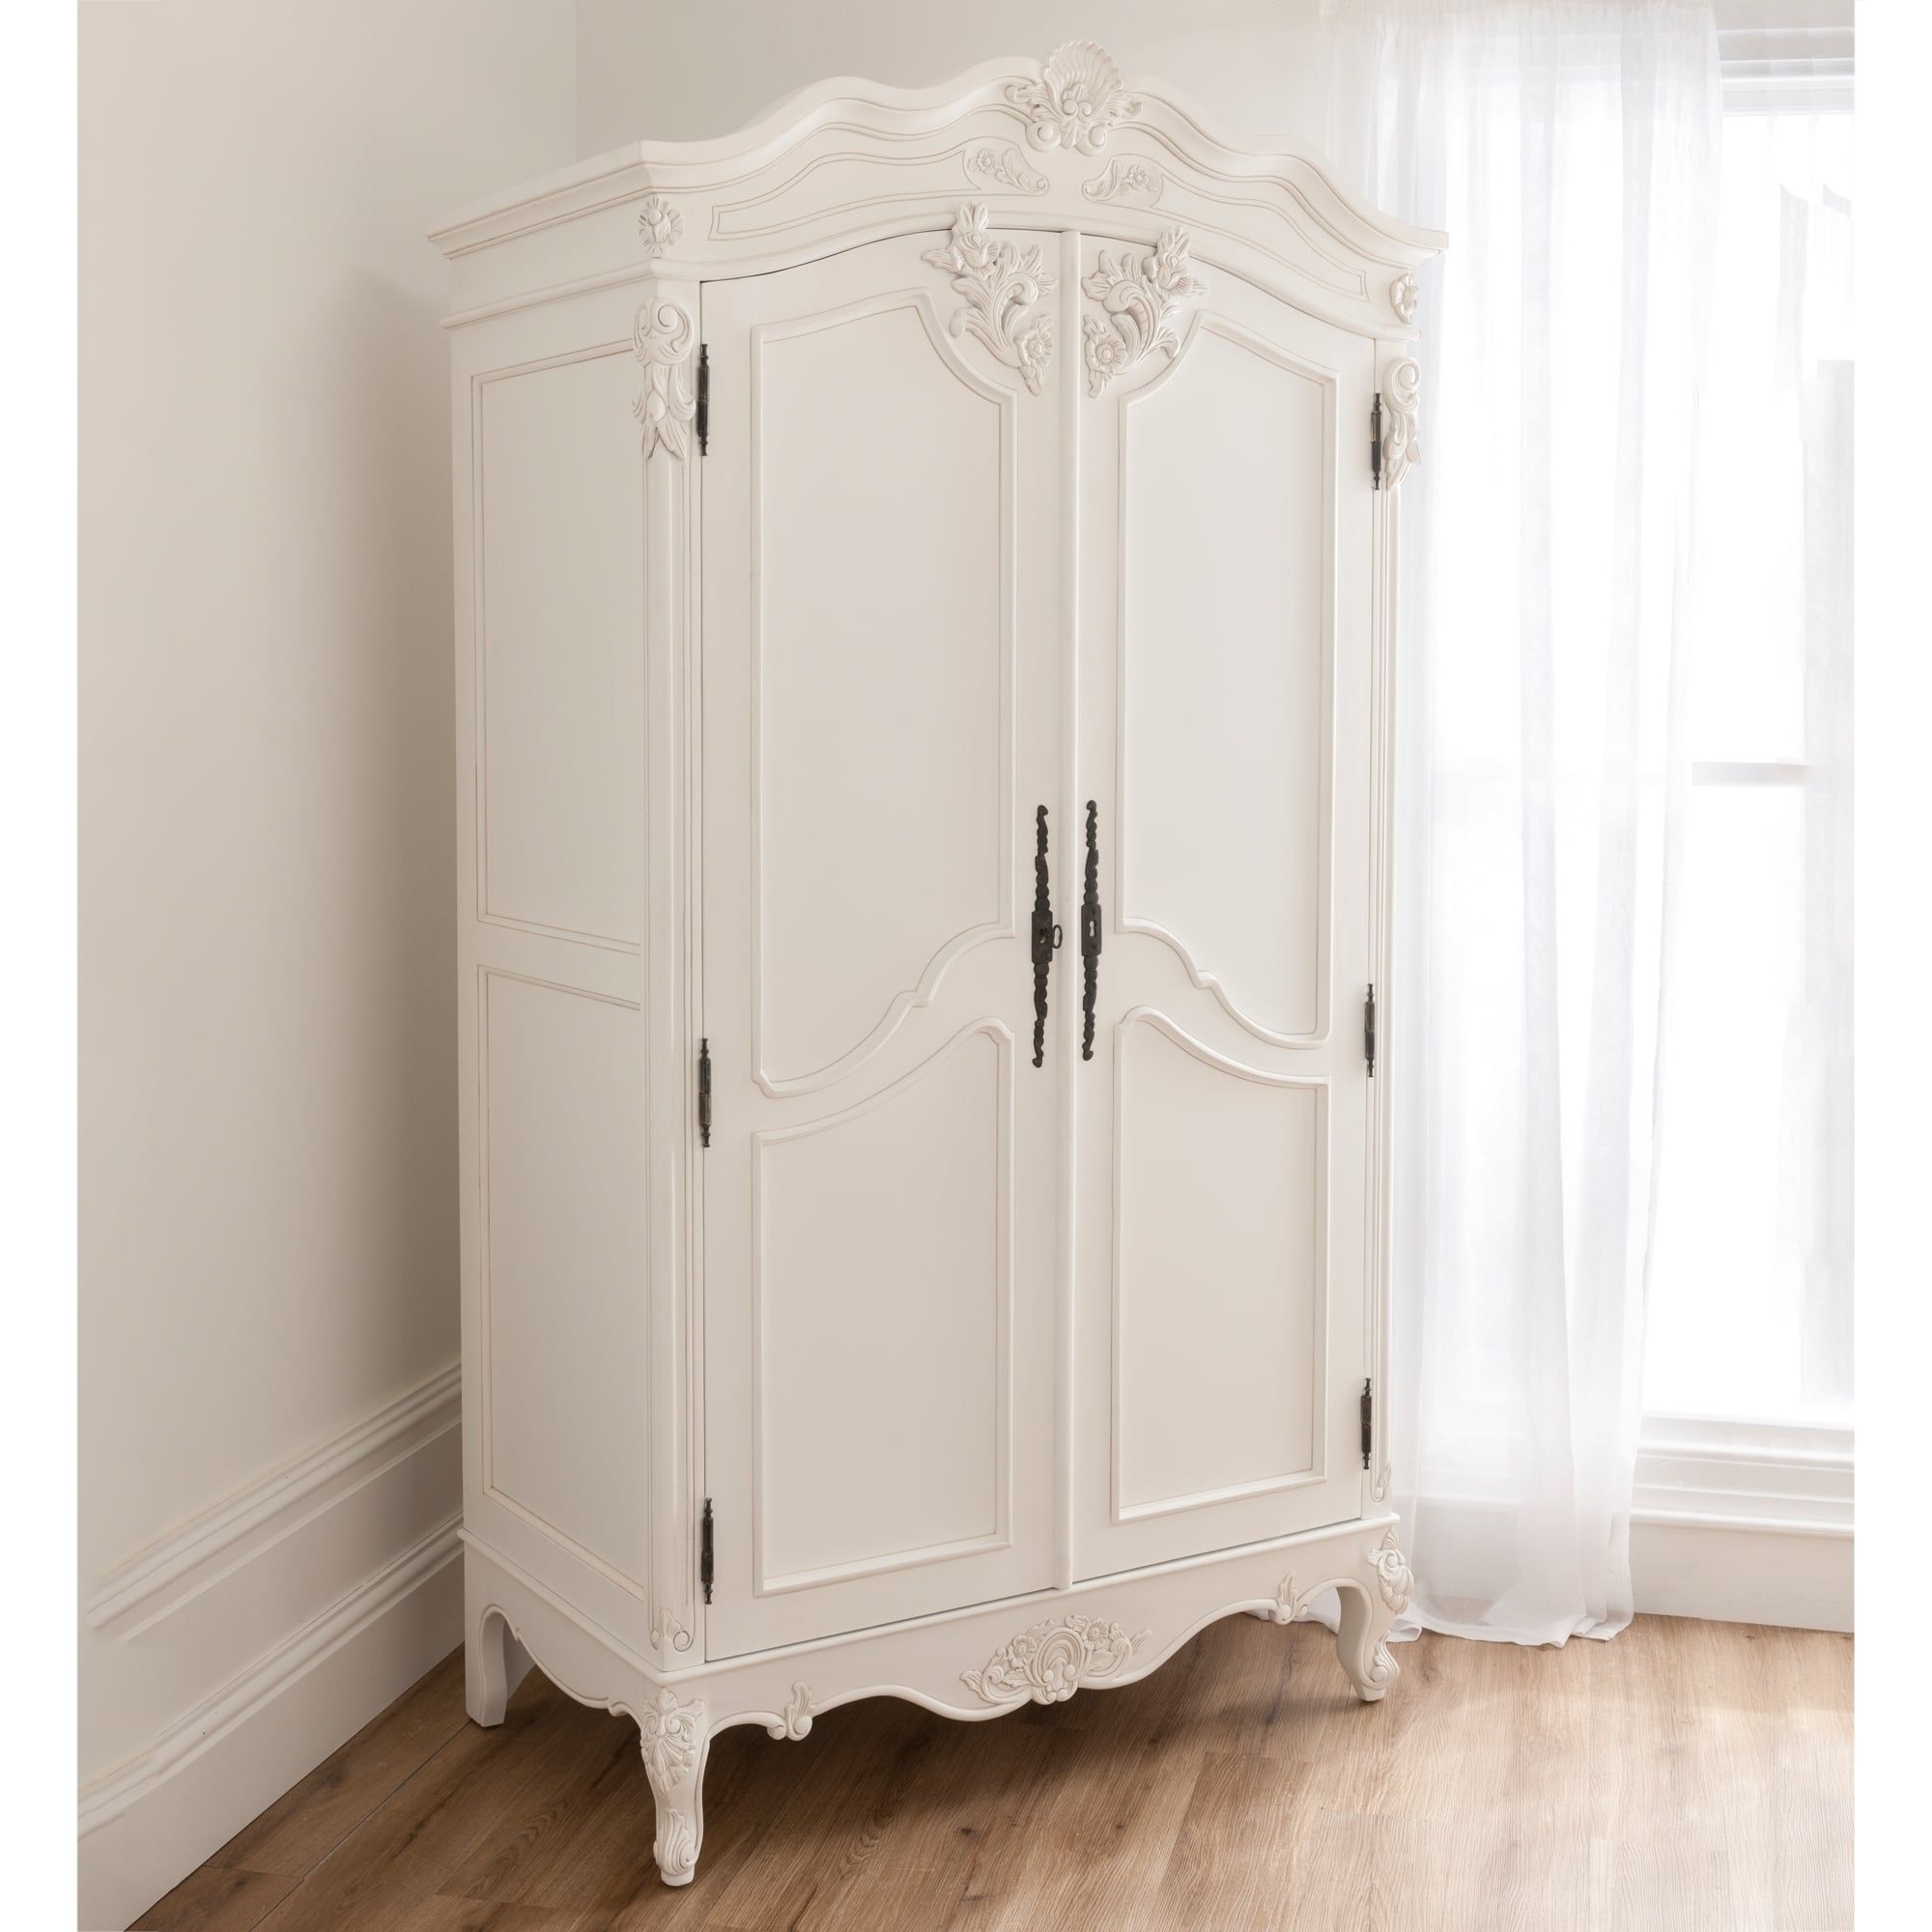 Latest Baroque Antique French Wardrobe Is Available Online From Intended For Cheap French Style Wardrobes (View 3 of 15)